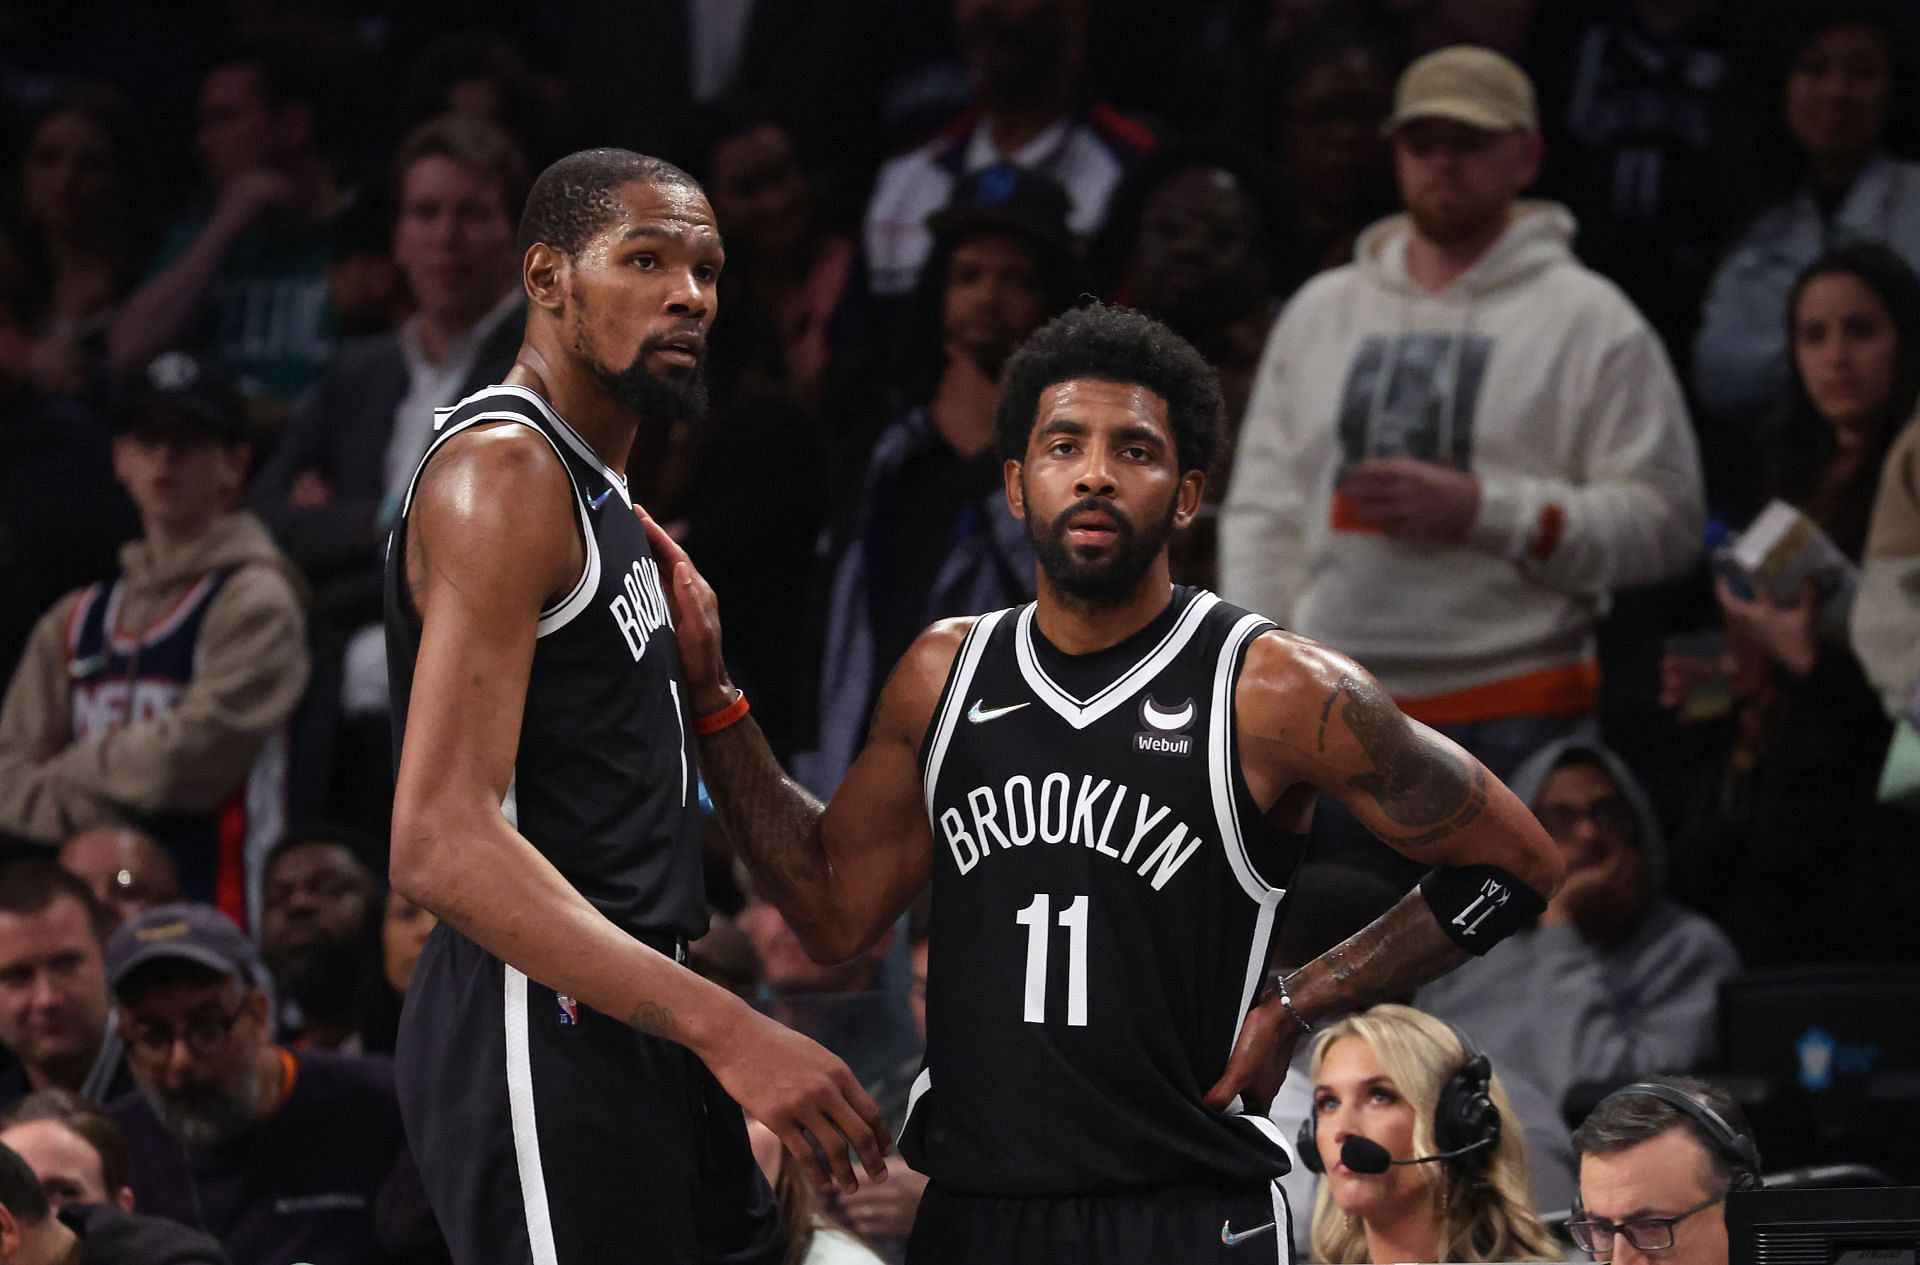 Brooklyn Nets'ten Kevin Durant ve Kyrie Irving (11)